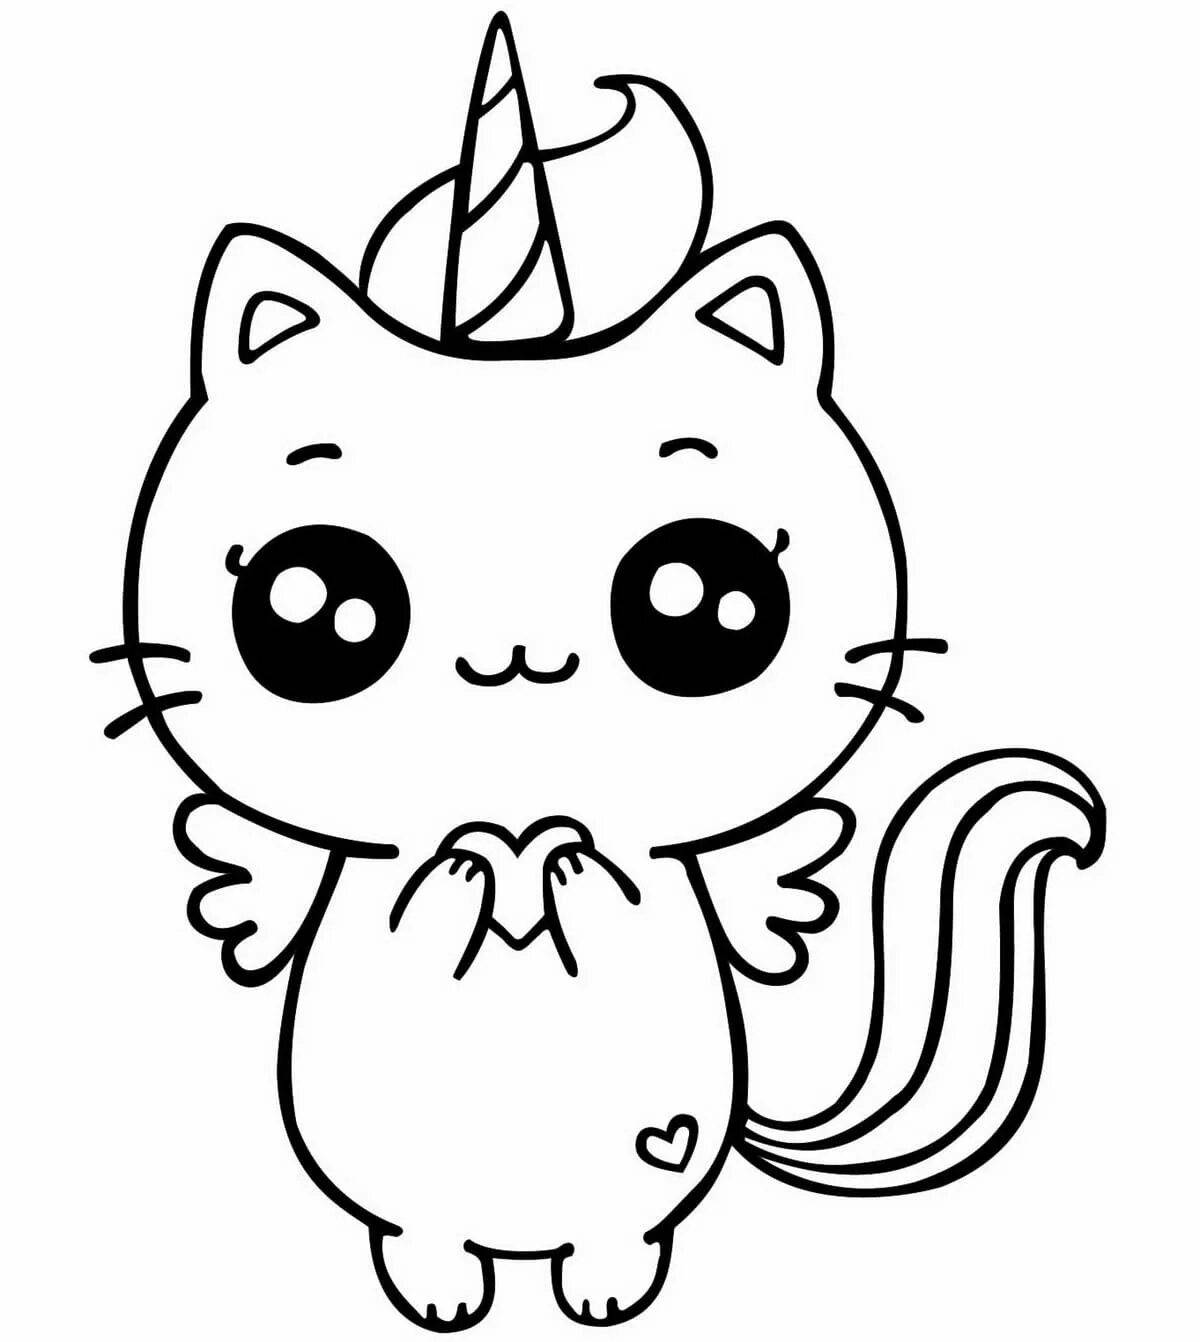 Coloring pages with taste for girls 12 years old, cute cats